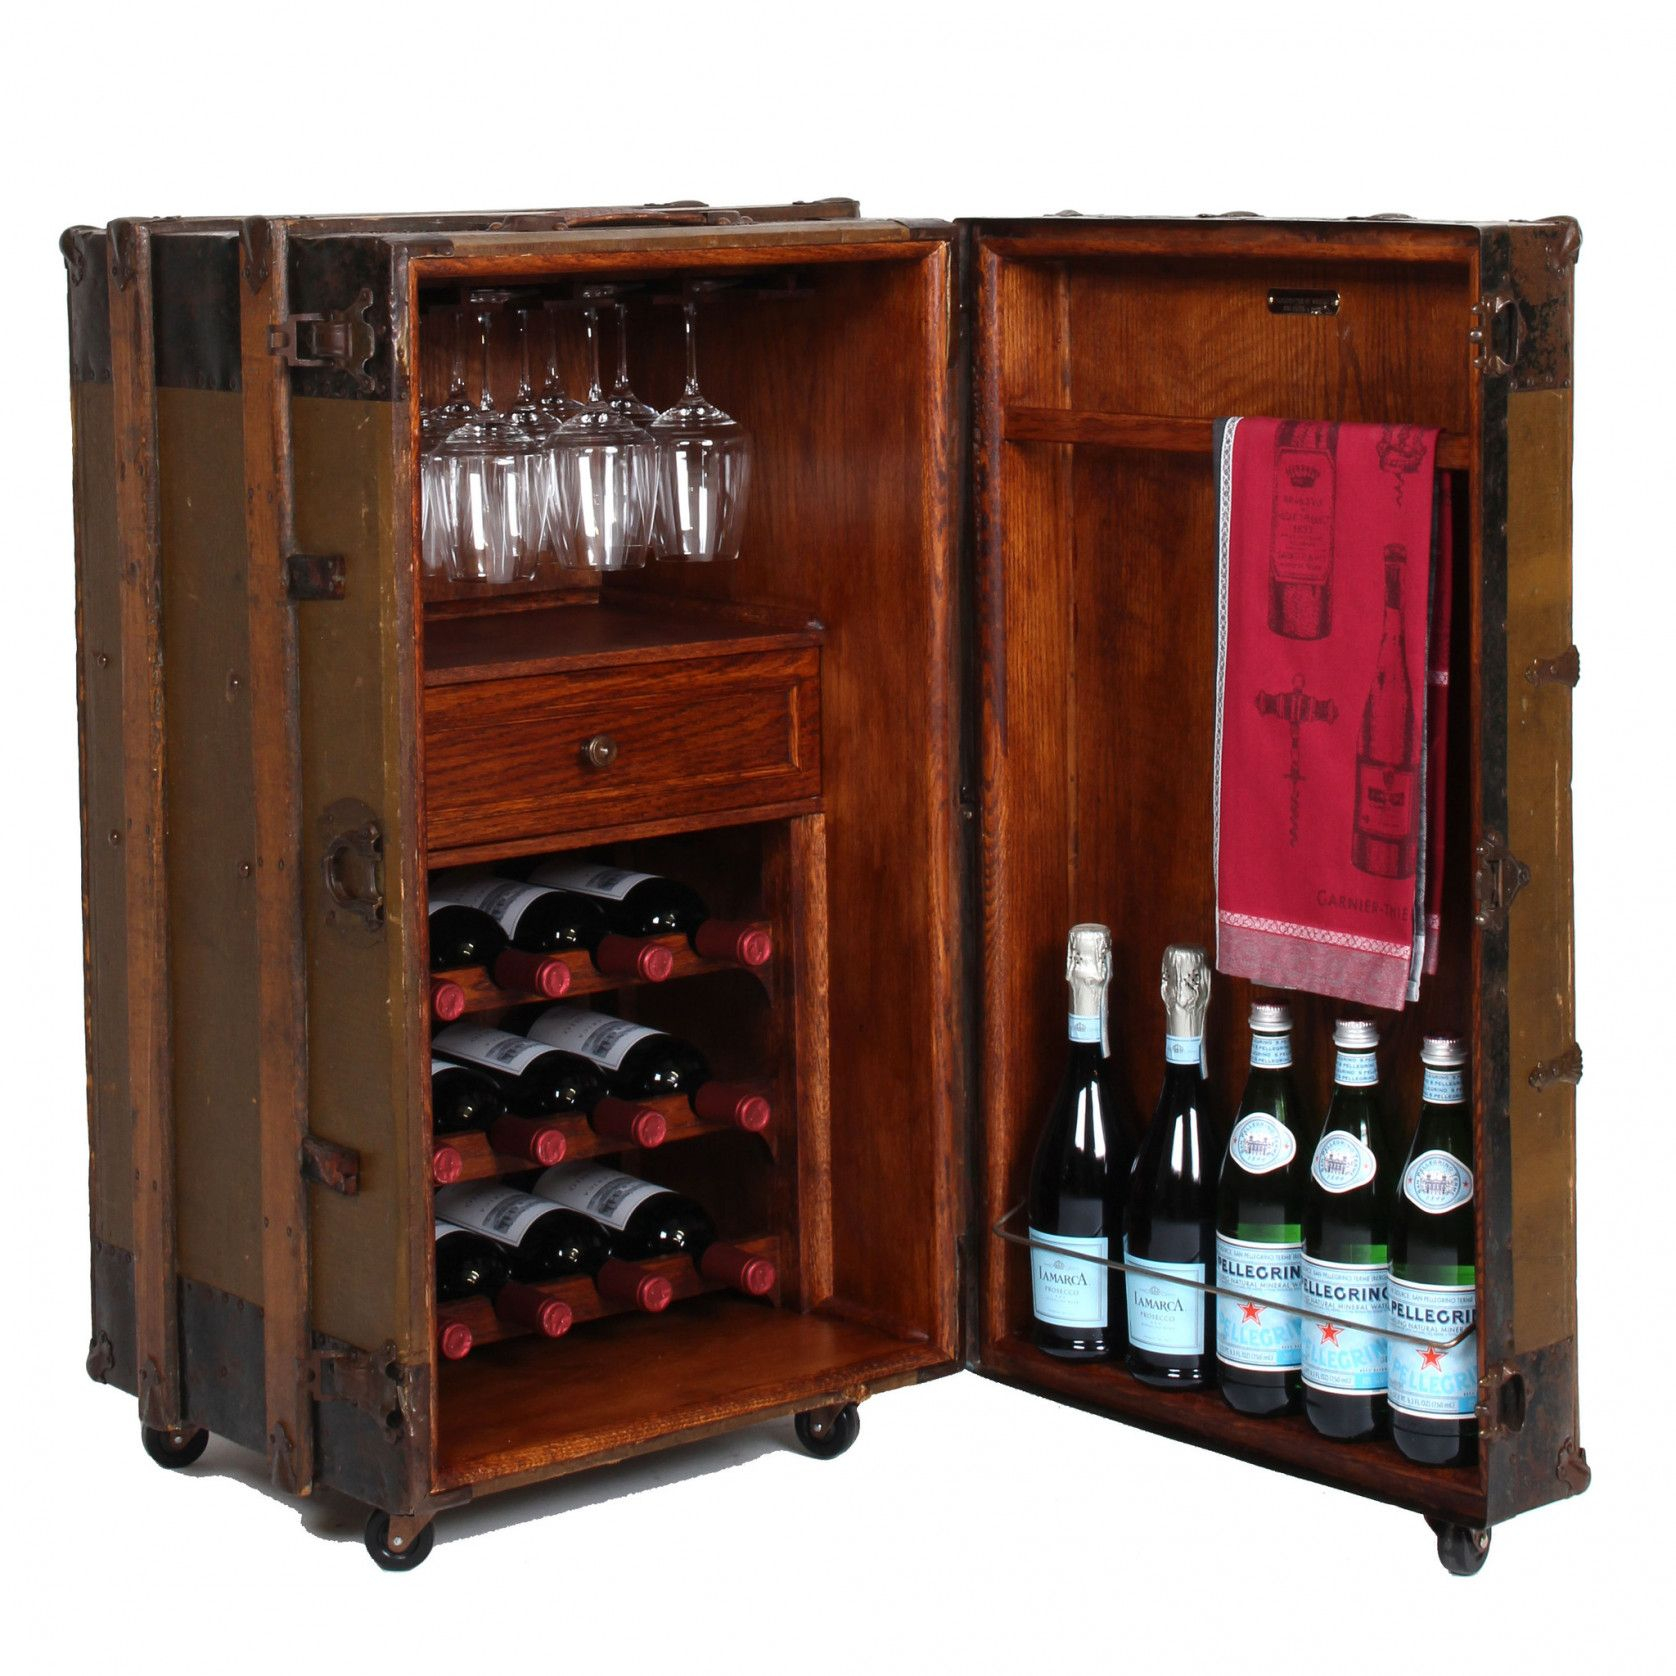 Pin Rahayu12 On Interior Analogi Wine Bar Cabinet intended for proportions 1676 X 1676